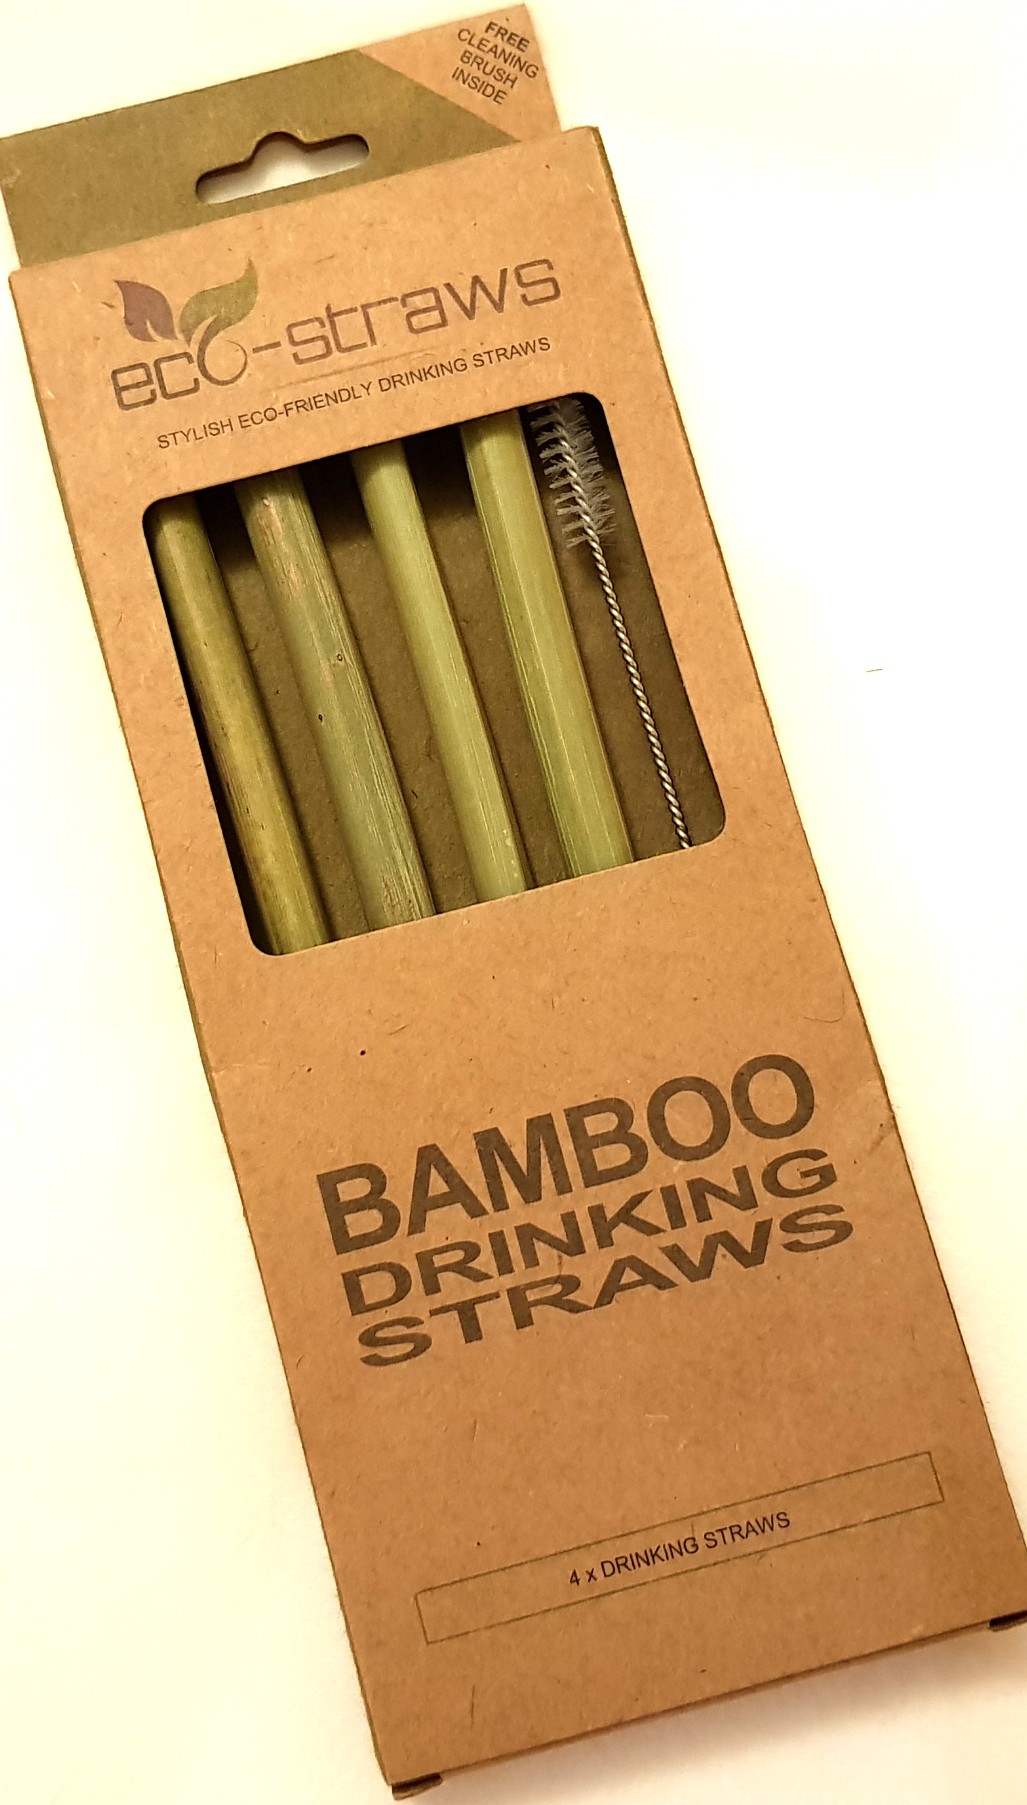 Bamboo straw, giveaway, competition, eco straws, #refusethestraw, #strawless, #StopSucking, plastic free, single use plastic, plastic straws, environment, sustainability, eco, green living, campaign